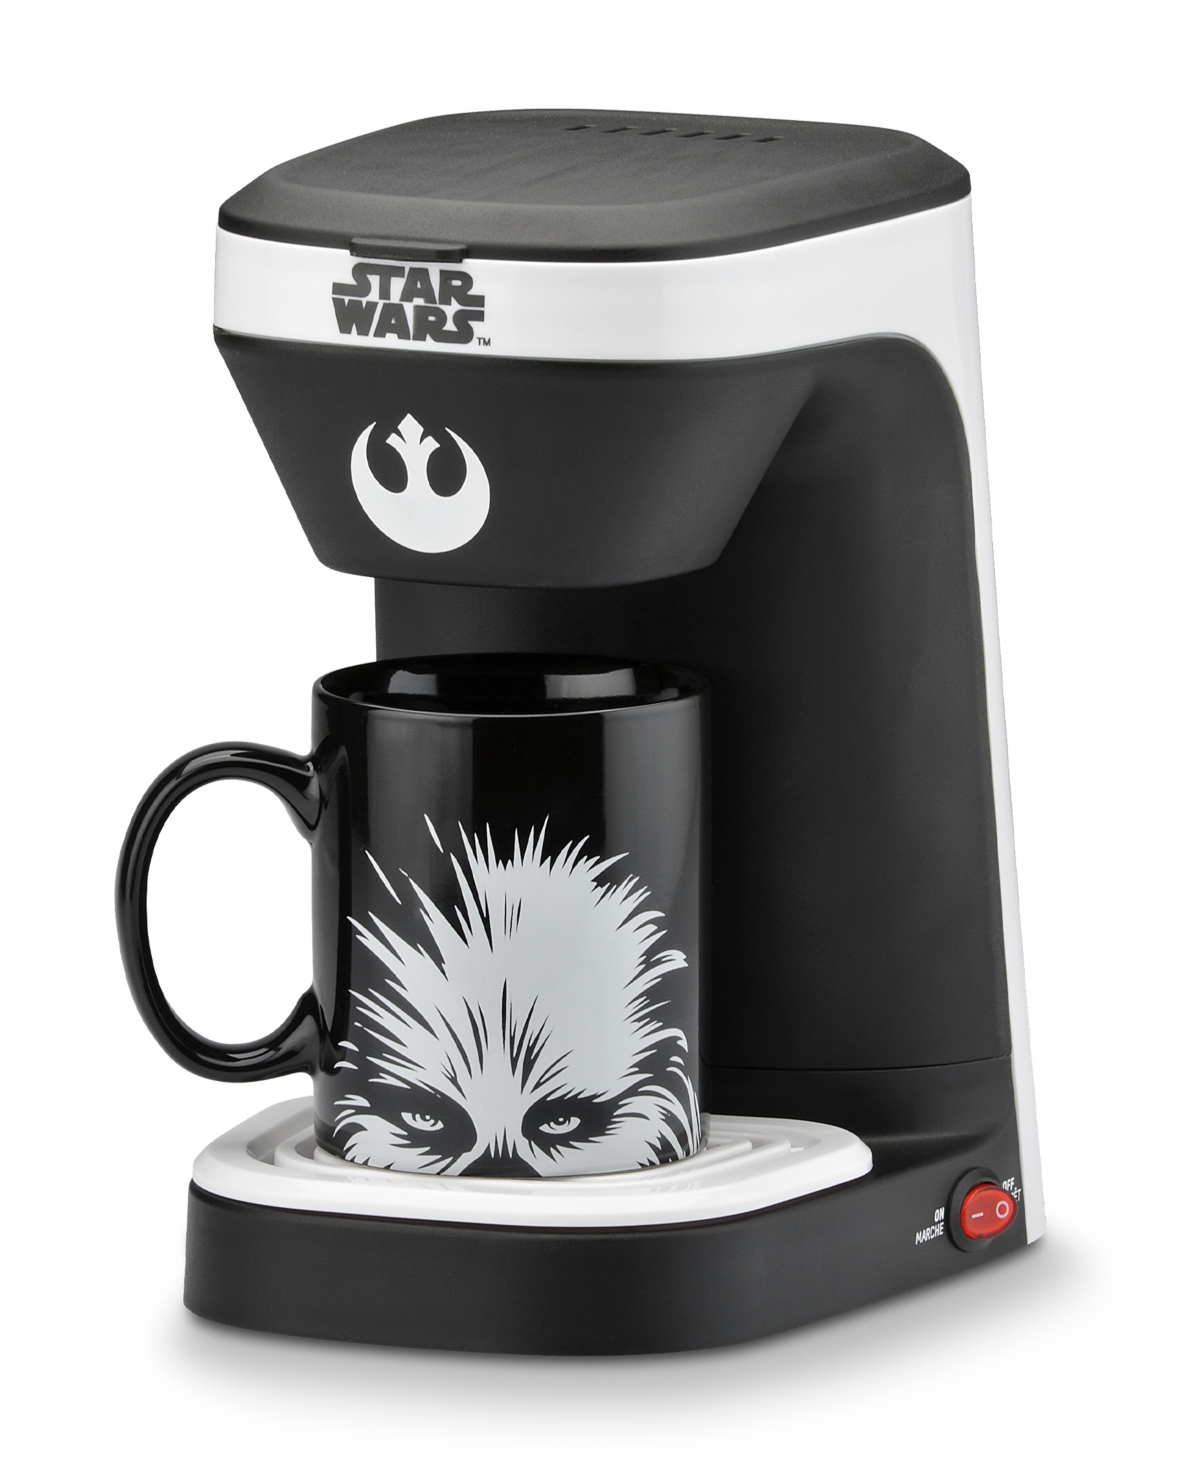 Star Wars 1-cup Coffee Maker In Silver